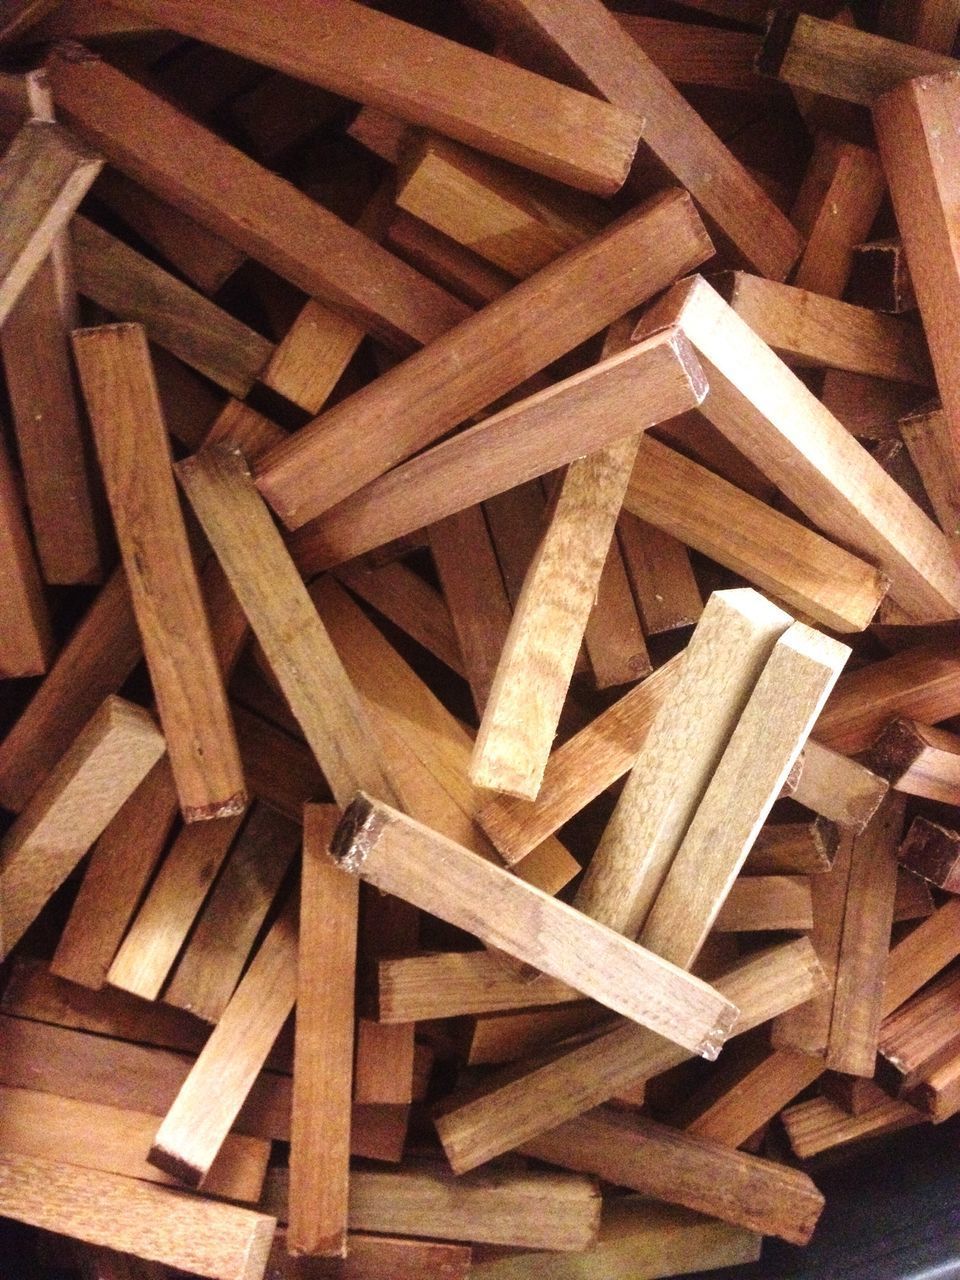 CLOSE UP OF WOODEN WOOD